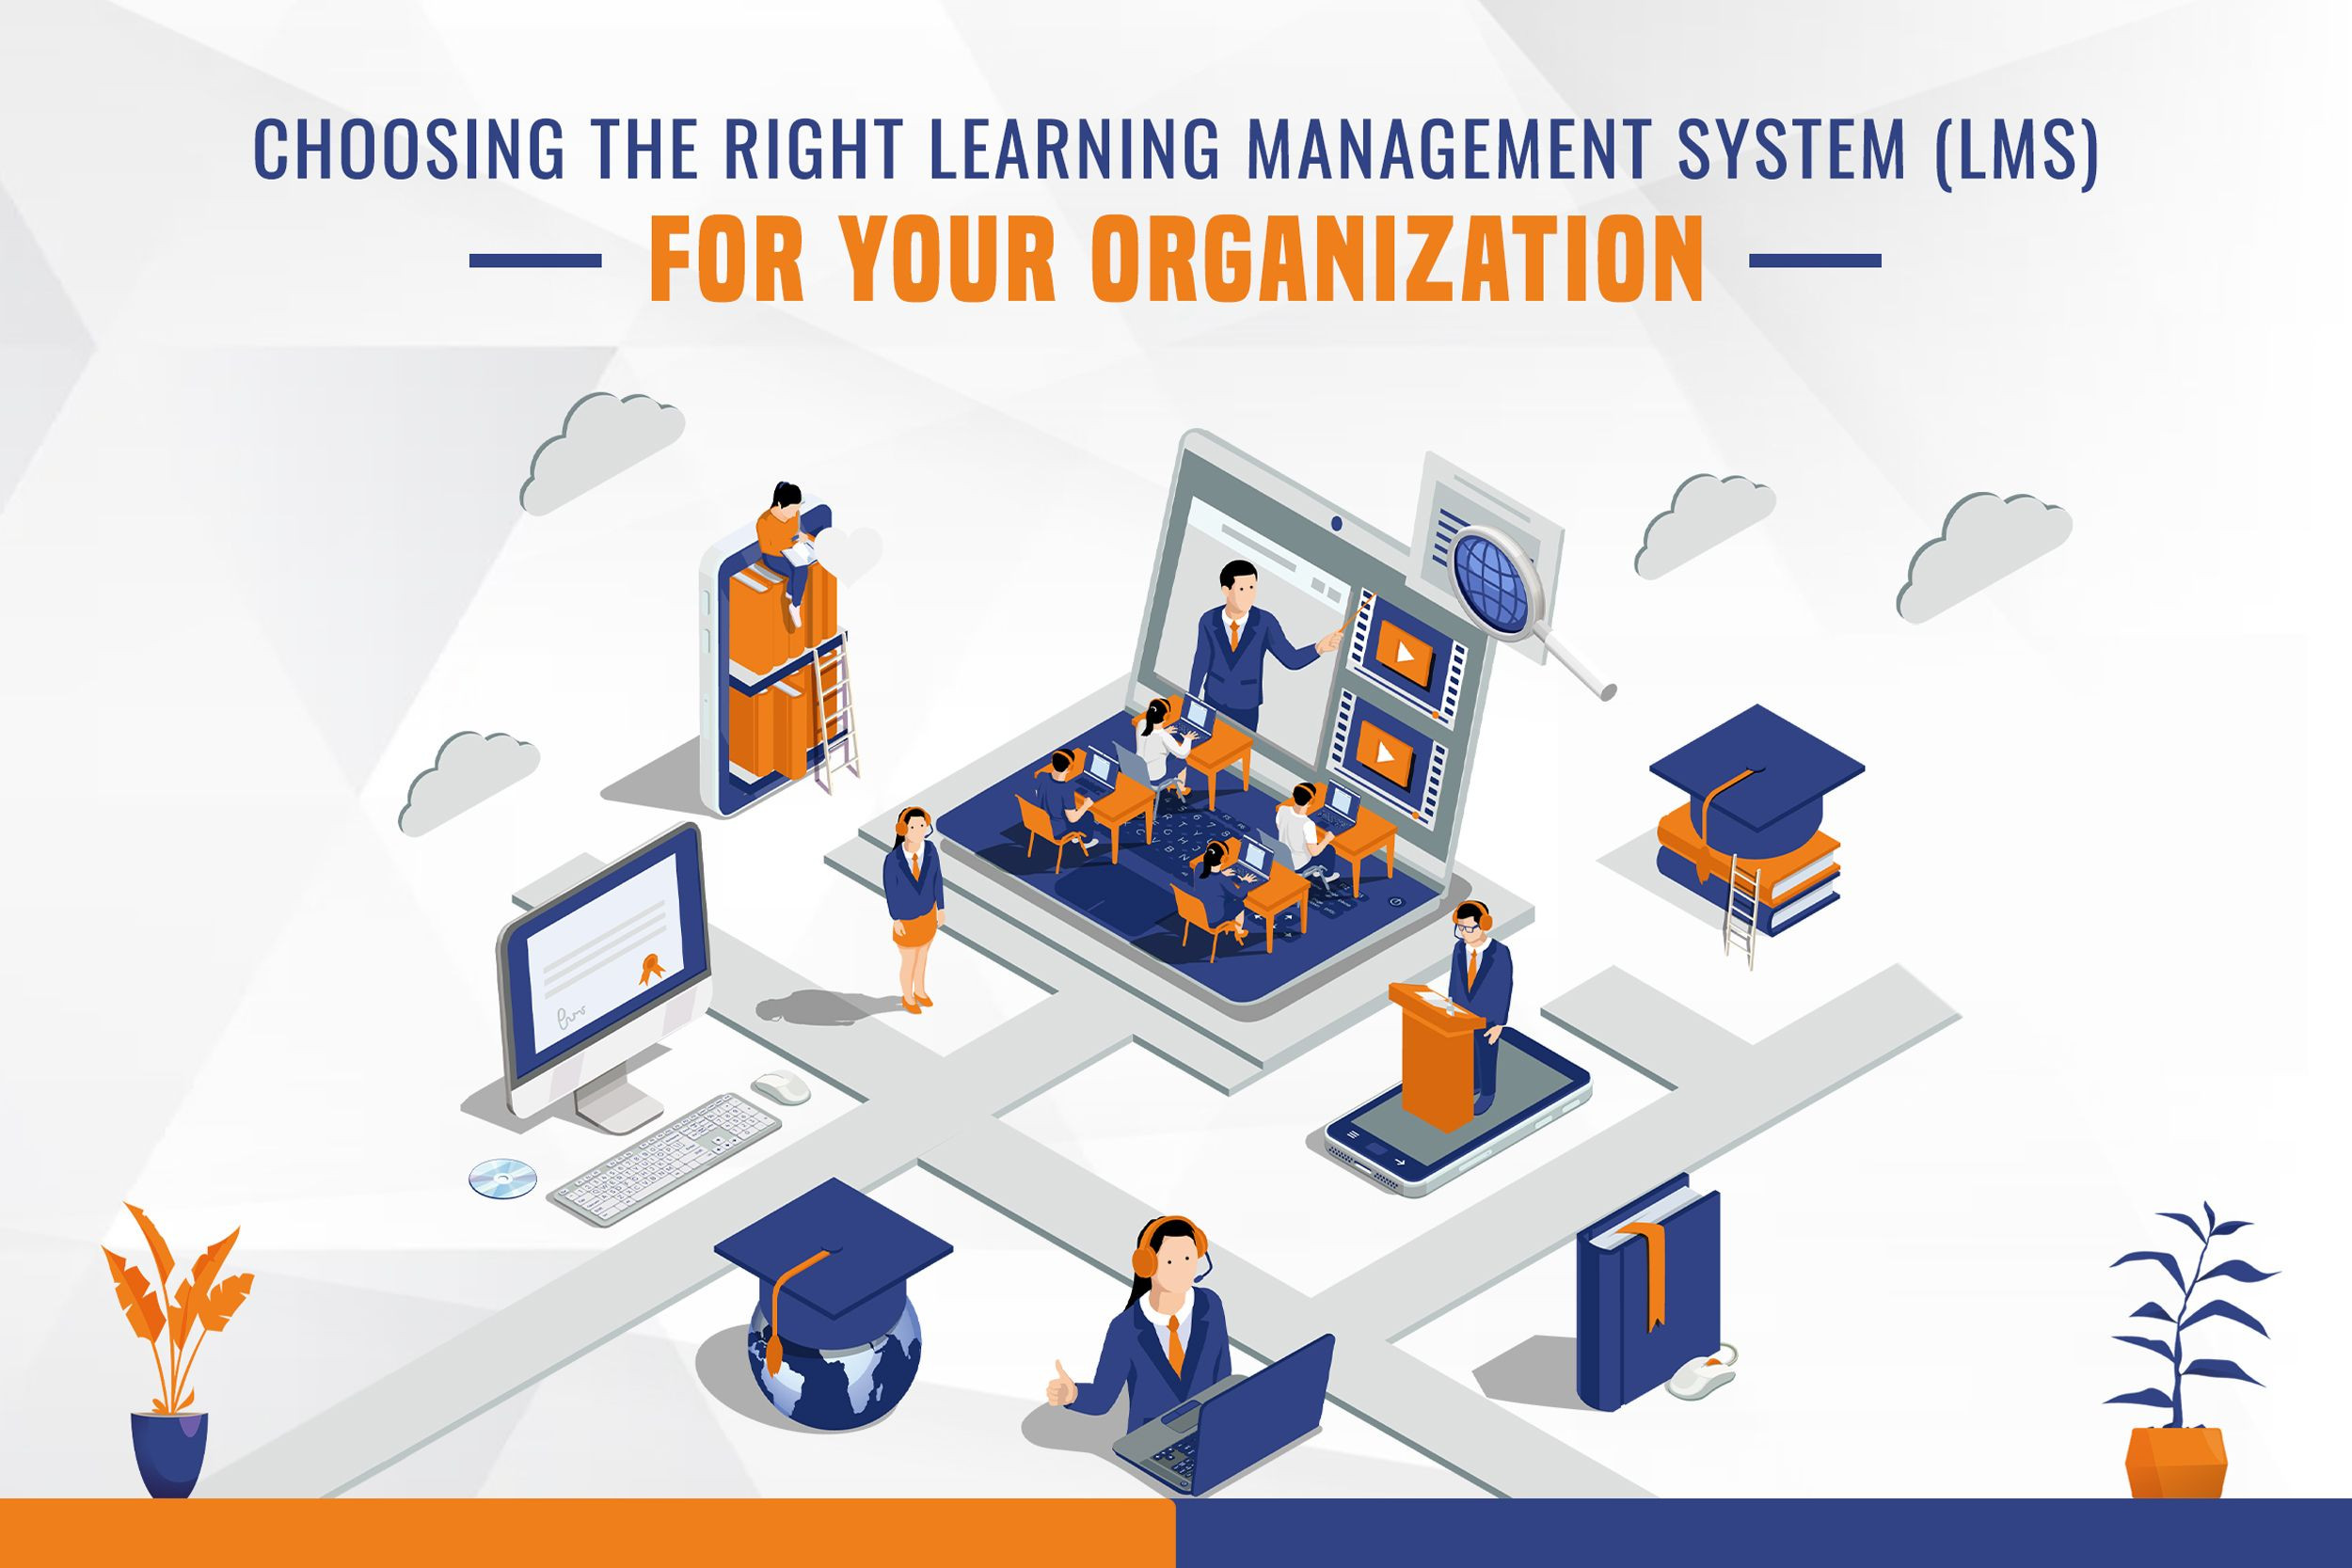 eLearning Content Management System